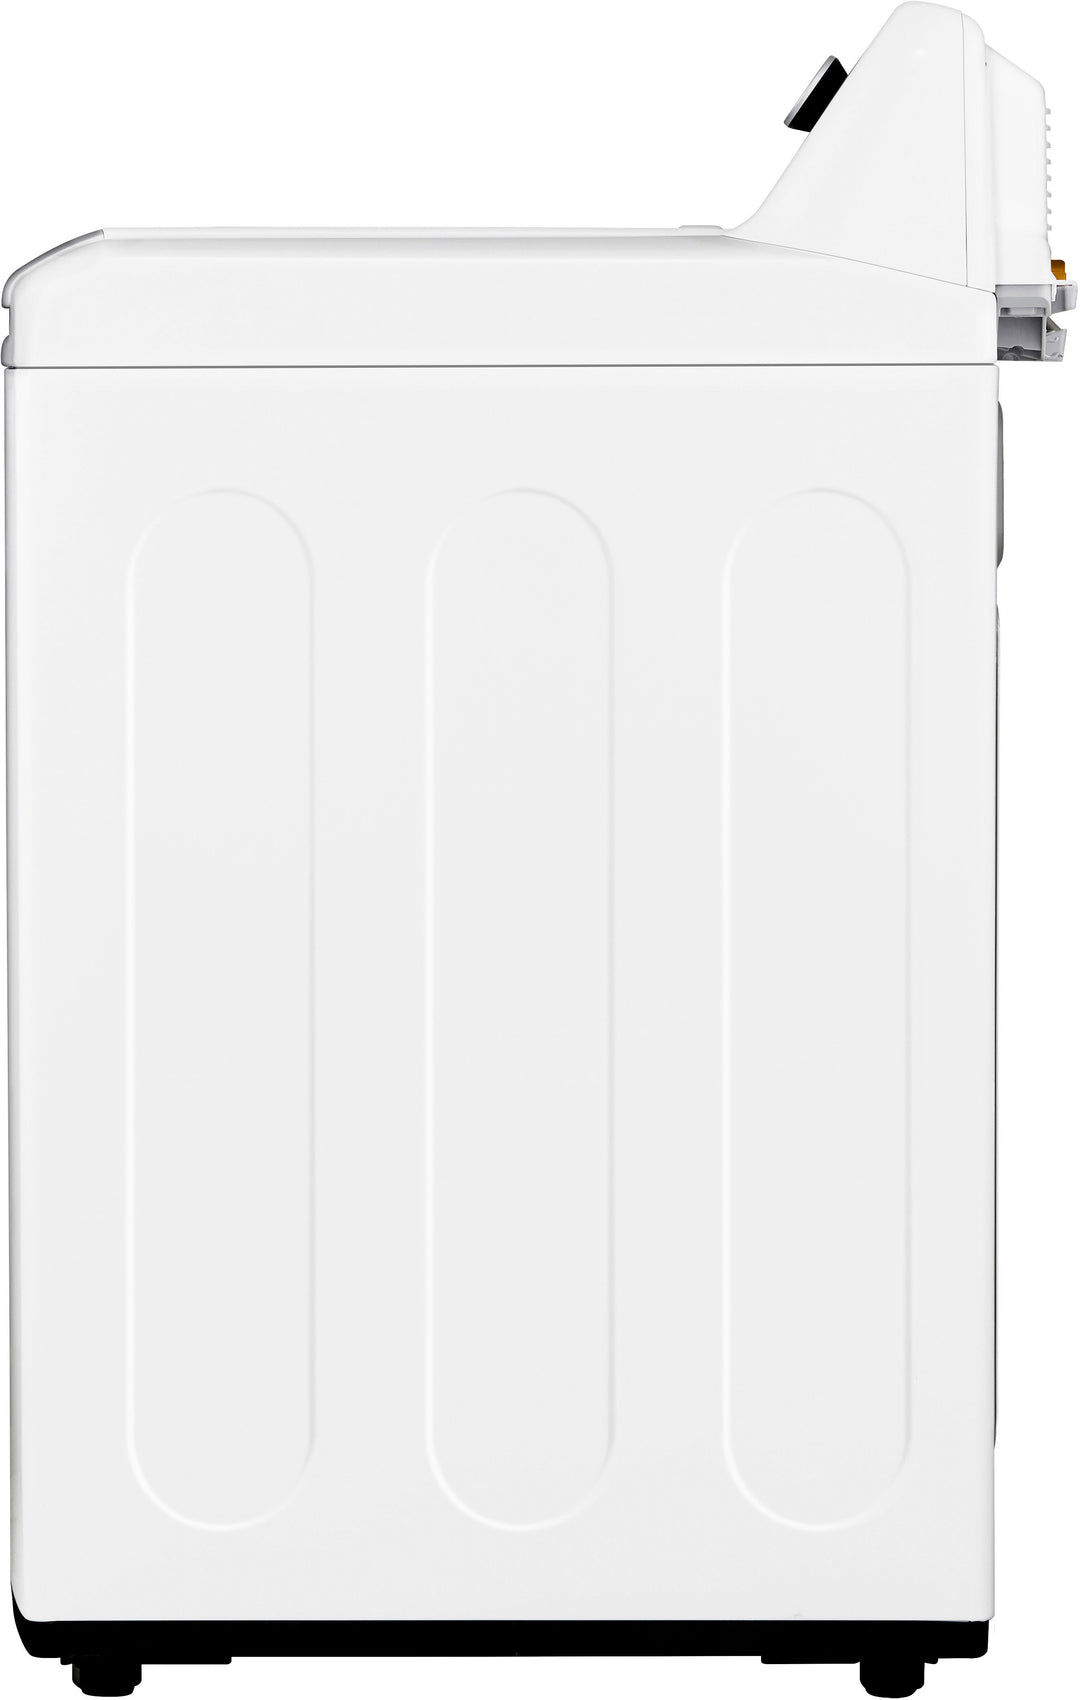 LG - 5.3 Cu. Ft. High-Efficiency Smart Top Load Washer with 4-Way Agitator and TurboWash3D - White_12